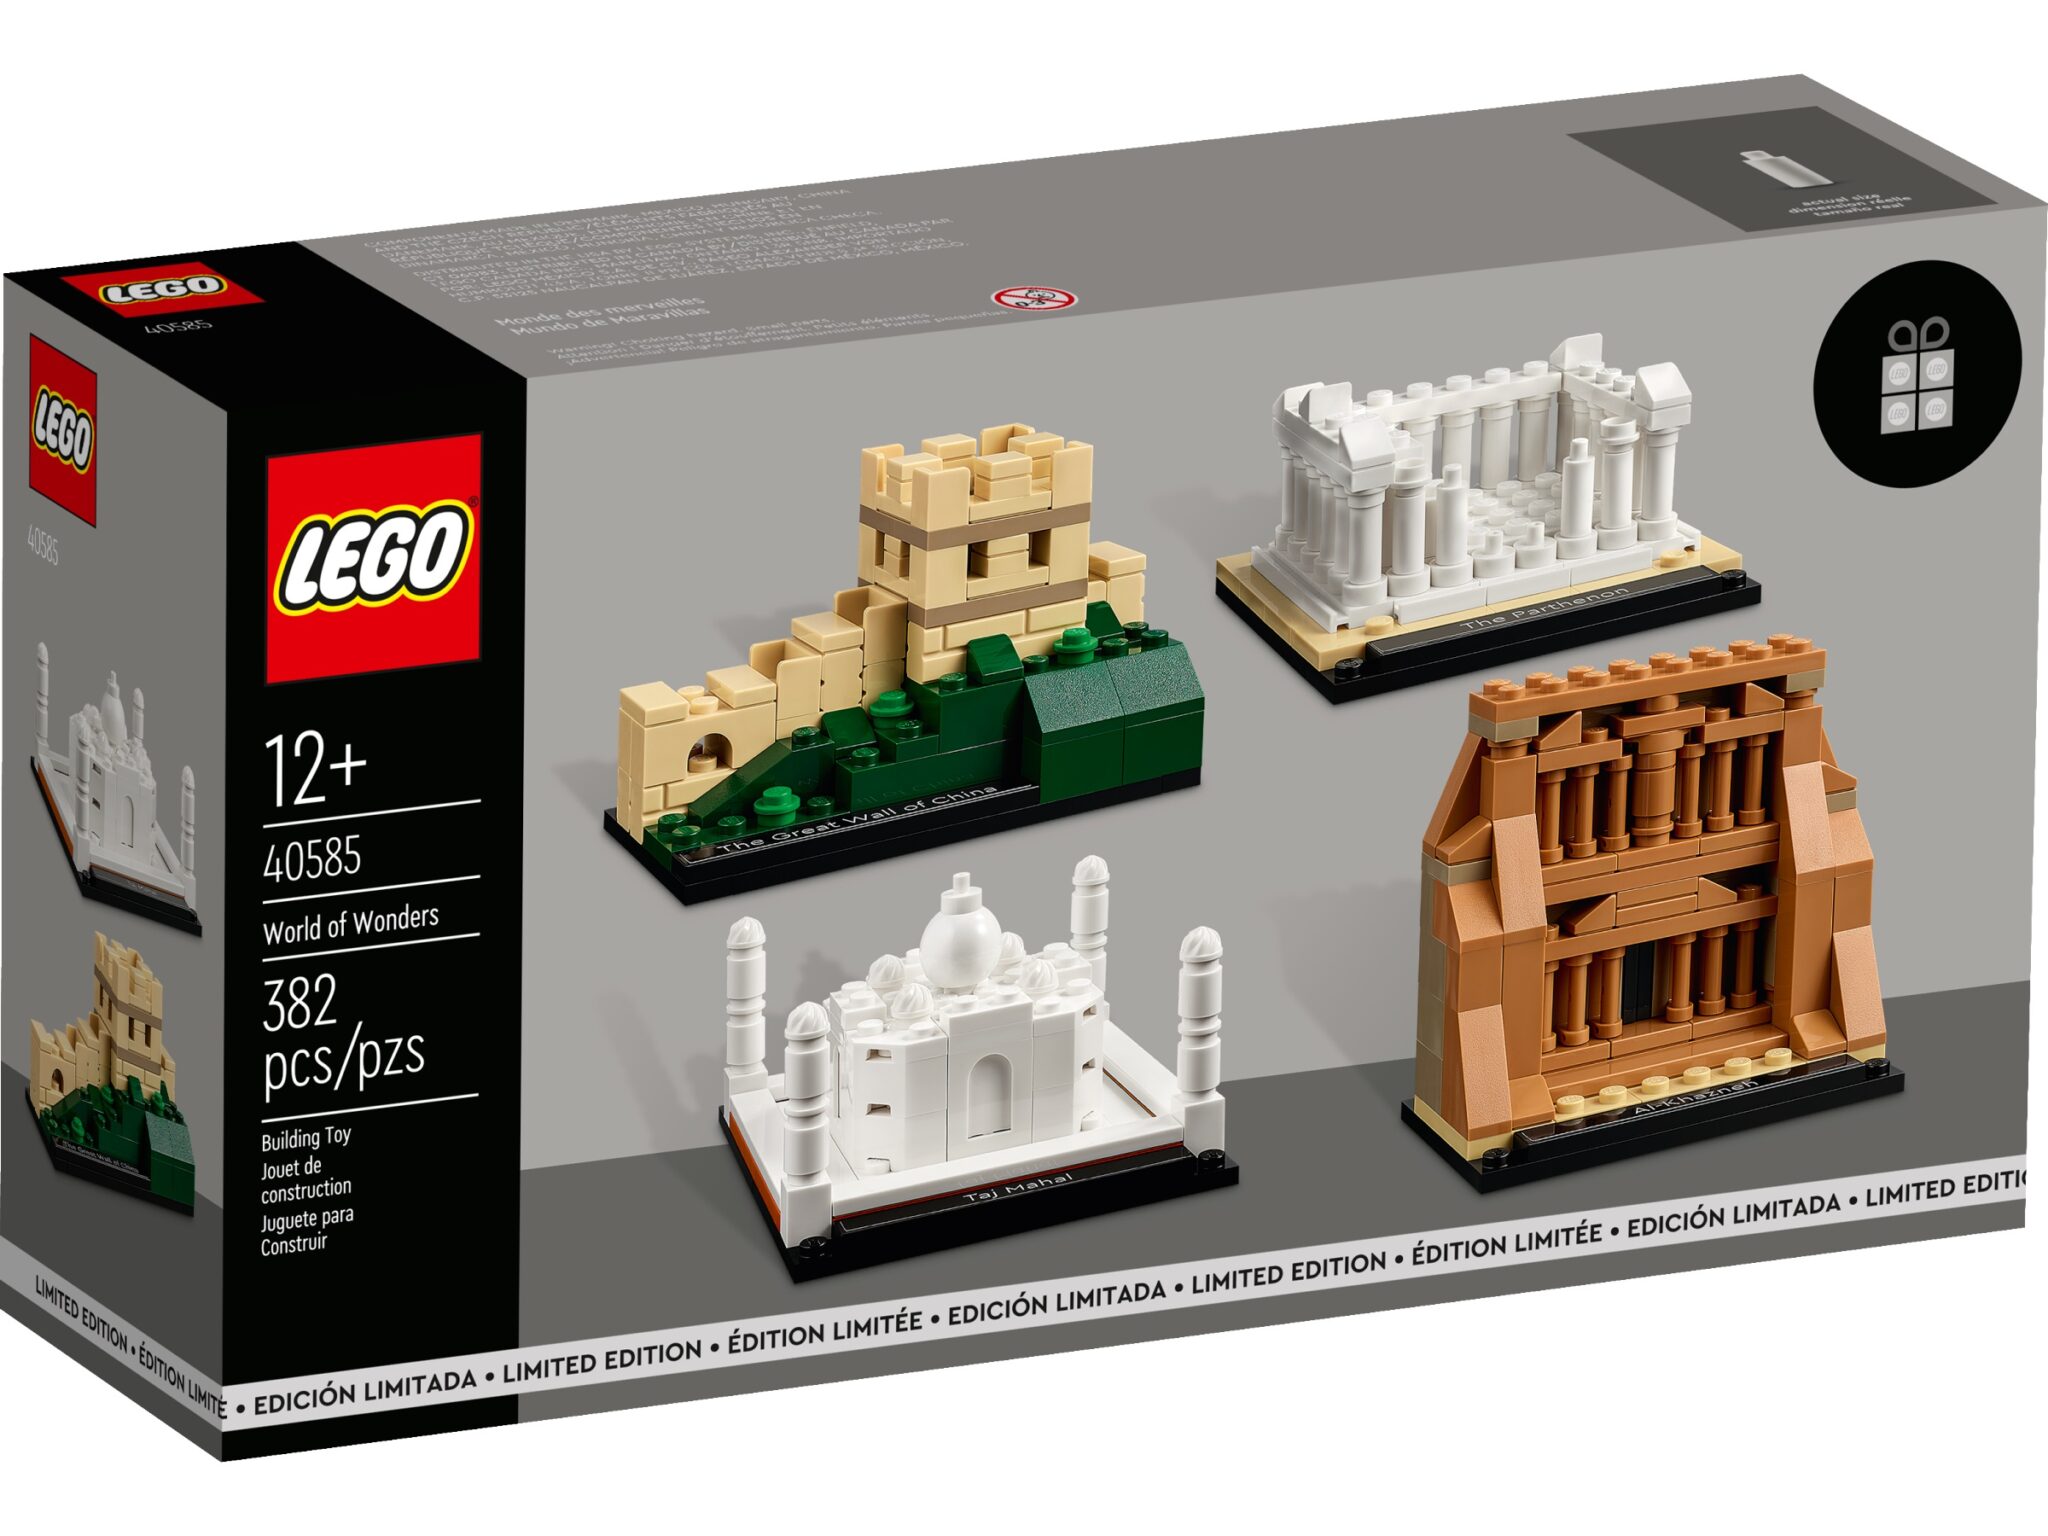 World of Wonders (40585) & Diorama (40584) Available in Rewards Center - The Brick Fan